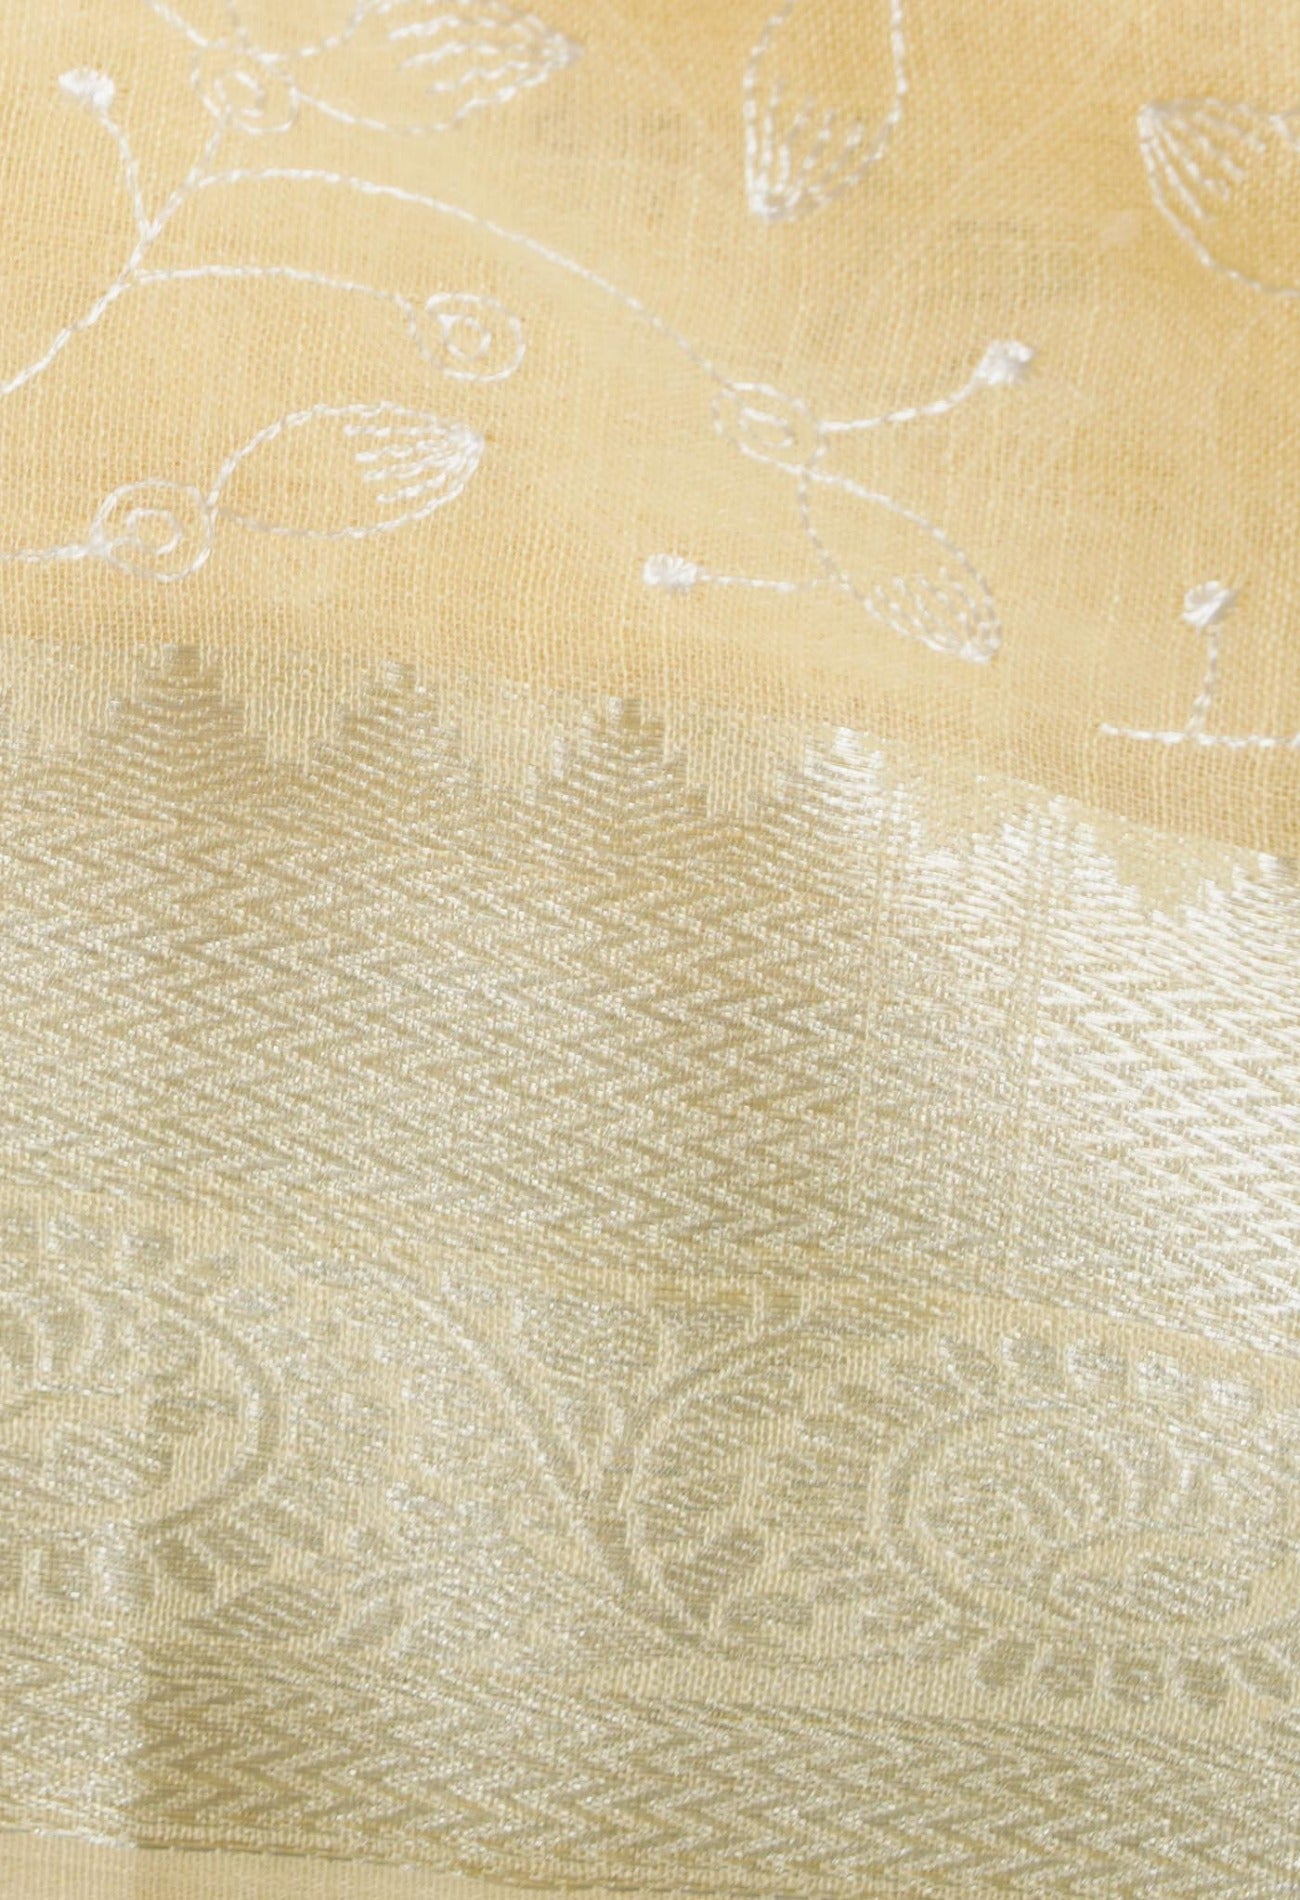 Online Shopping for Yellow Pure Embroidery  Linen Saree with Hand Block Prints from West Bengal at Unnatisilks.com India
